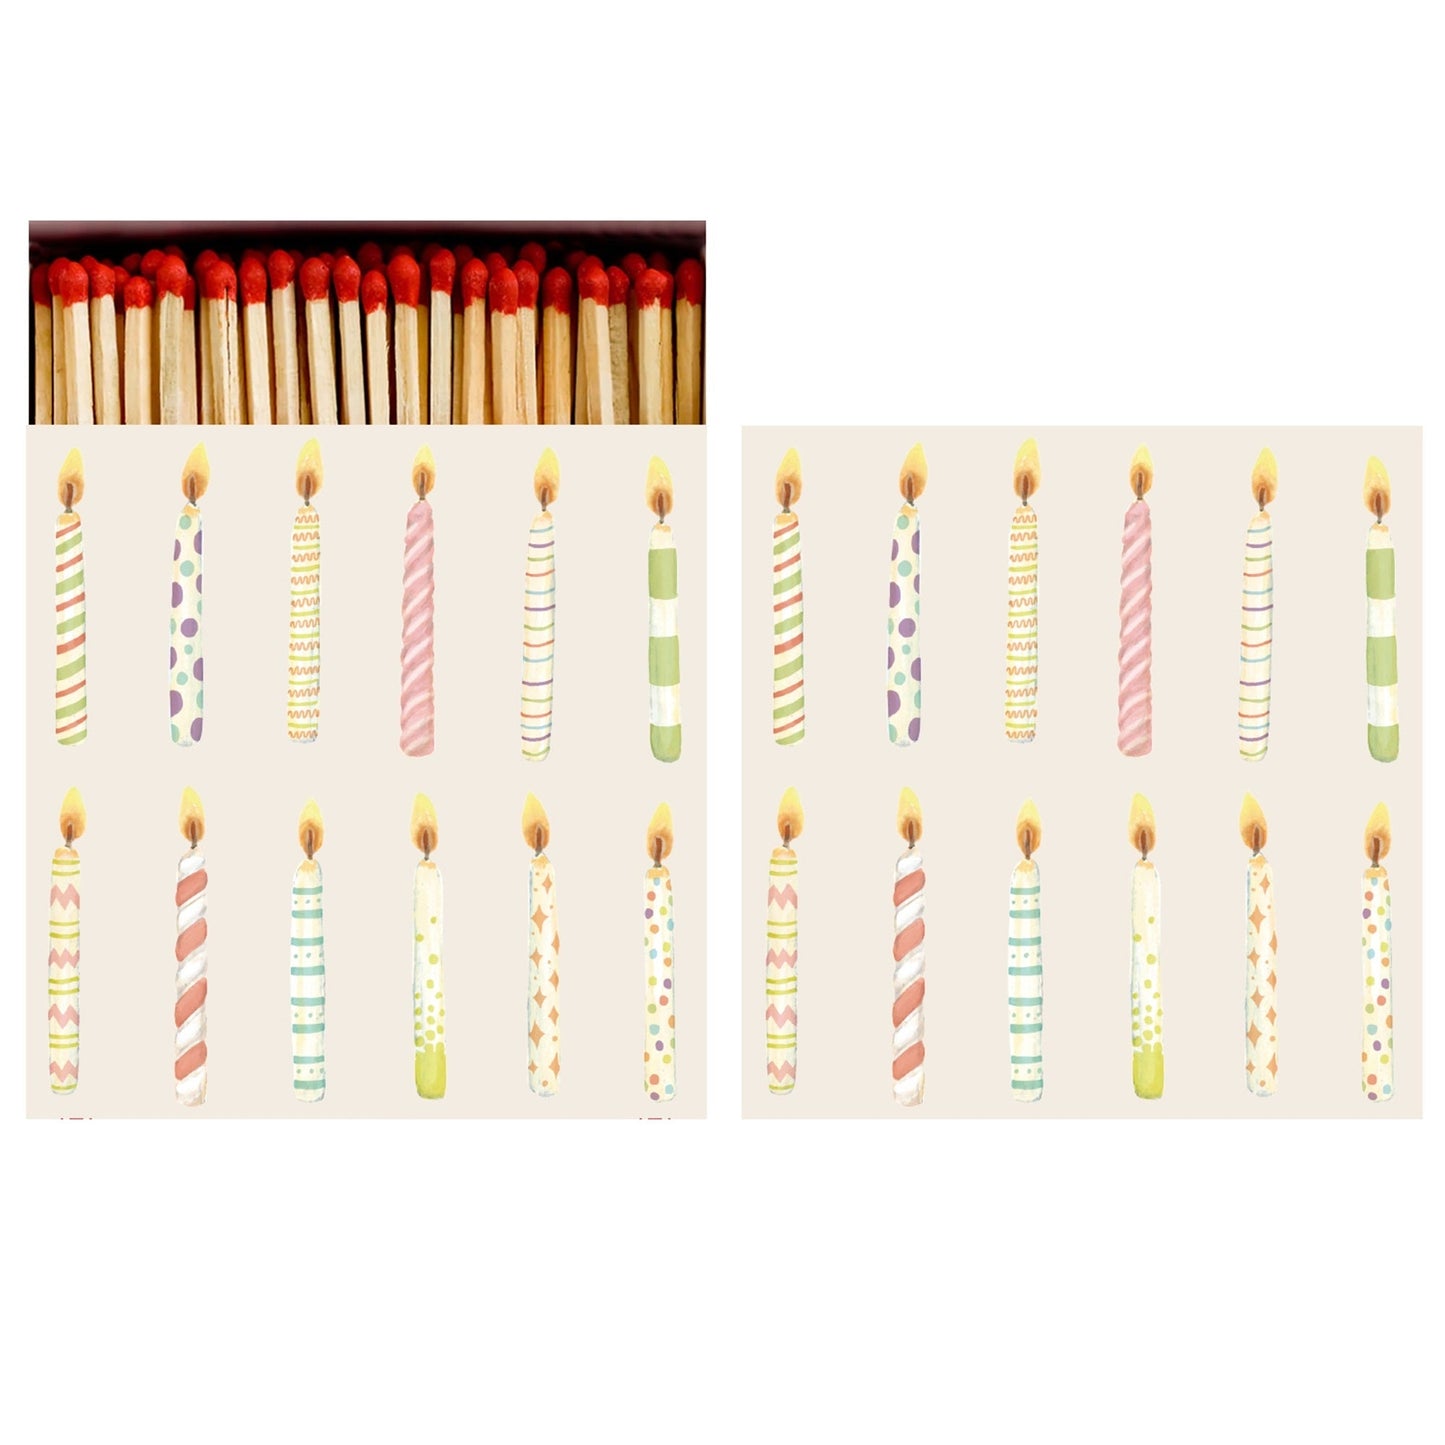 Birthday Candle Matches Box of 60 - Hester & Cook - Gaines Jewelers